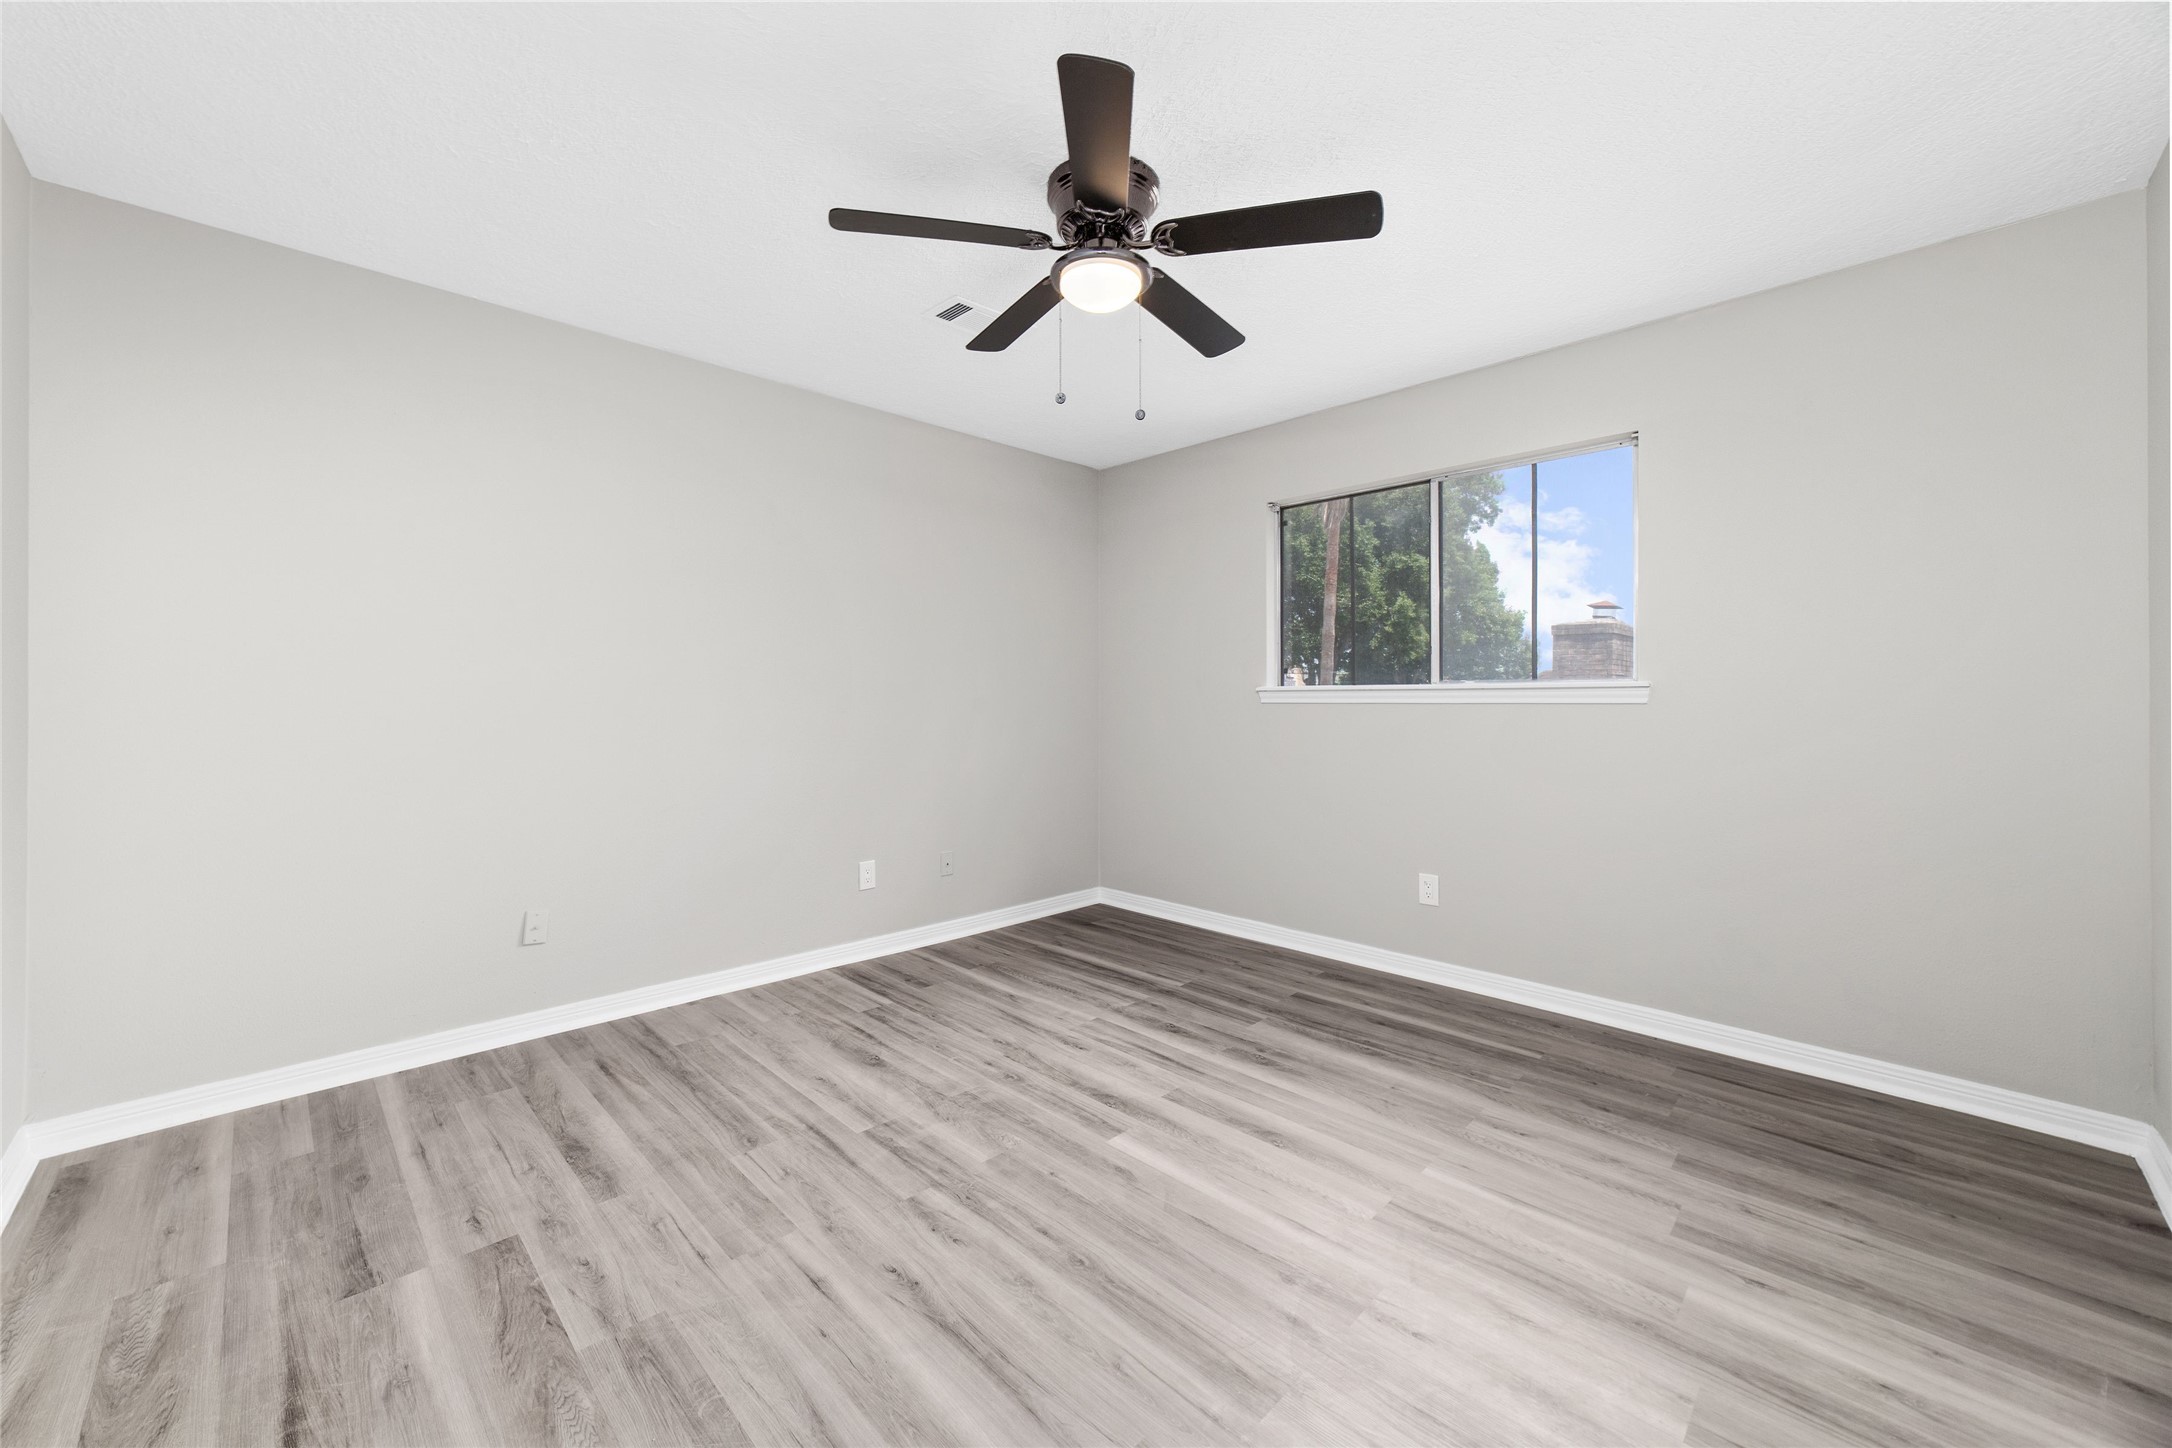 3rd bedroom upstairs - If you have additional questions regarding 22506 Wetherburn Lane  in Katy or would like to tour the property with us call 800-660-1022 and reference MLS# 96980135.